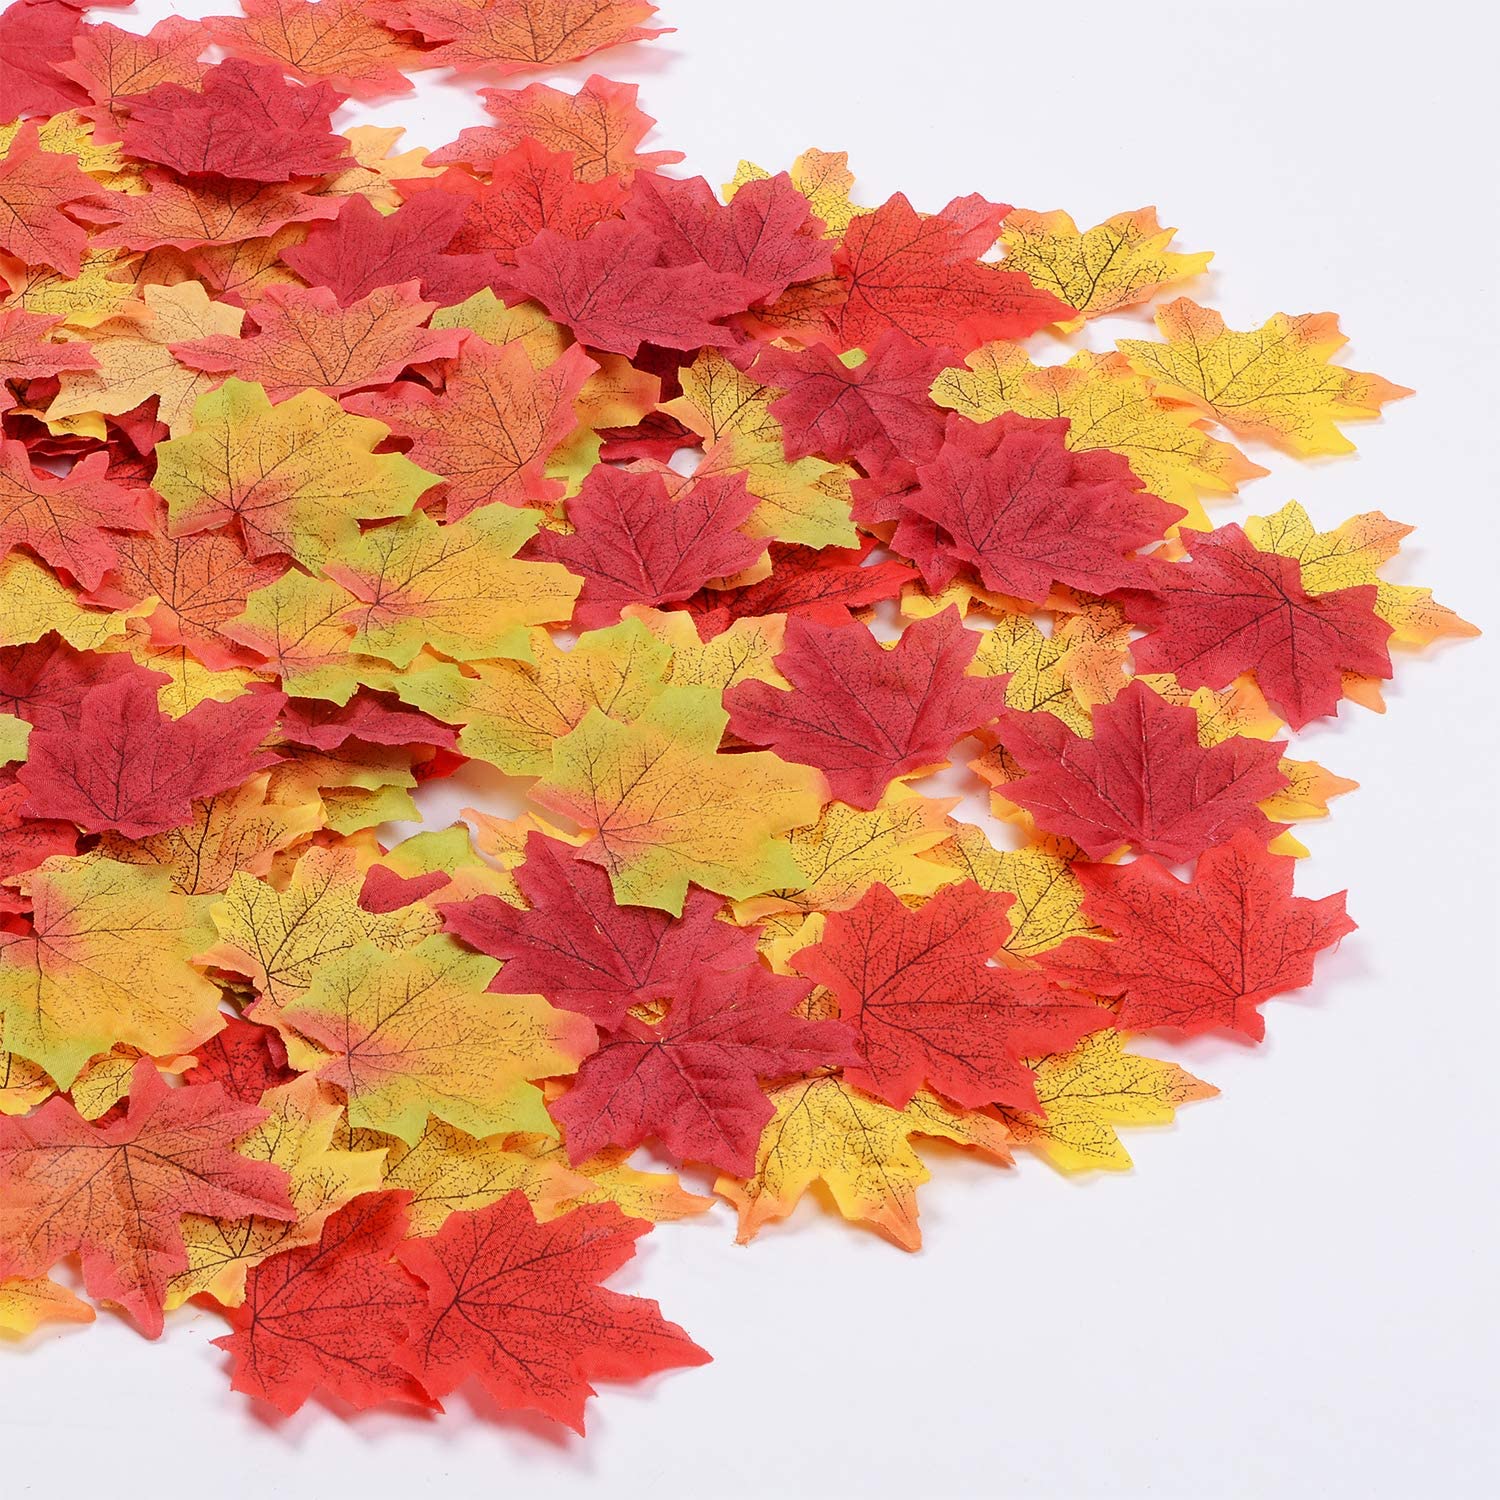 Lvydec 300 Pcs Fall Maple Leaves, 6 Color Artficial Autumn Leaves Decoration for Wedding Party Home Thanksgiving Day DIY and Craft: Amazon.ca: Home & Kitchen